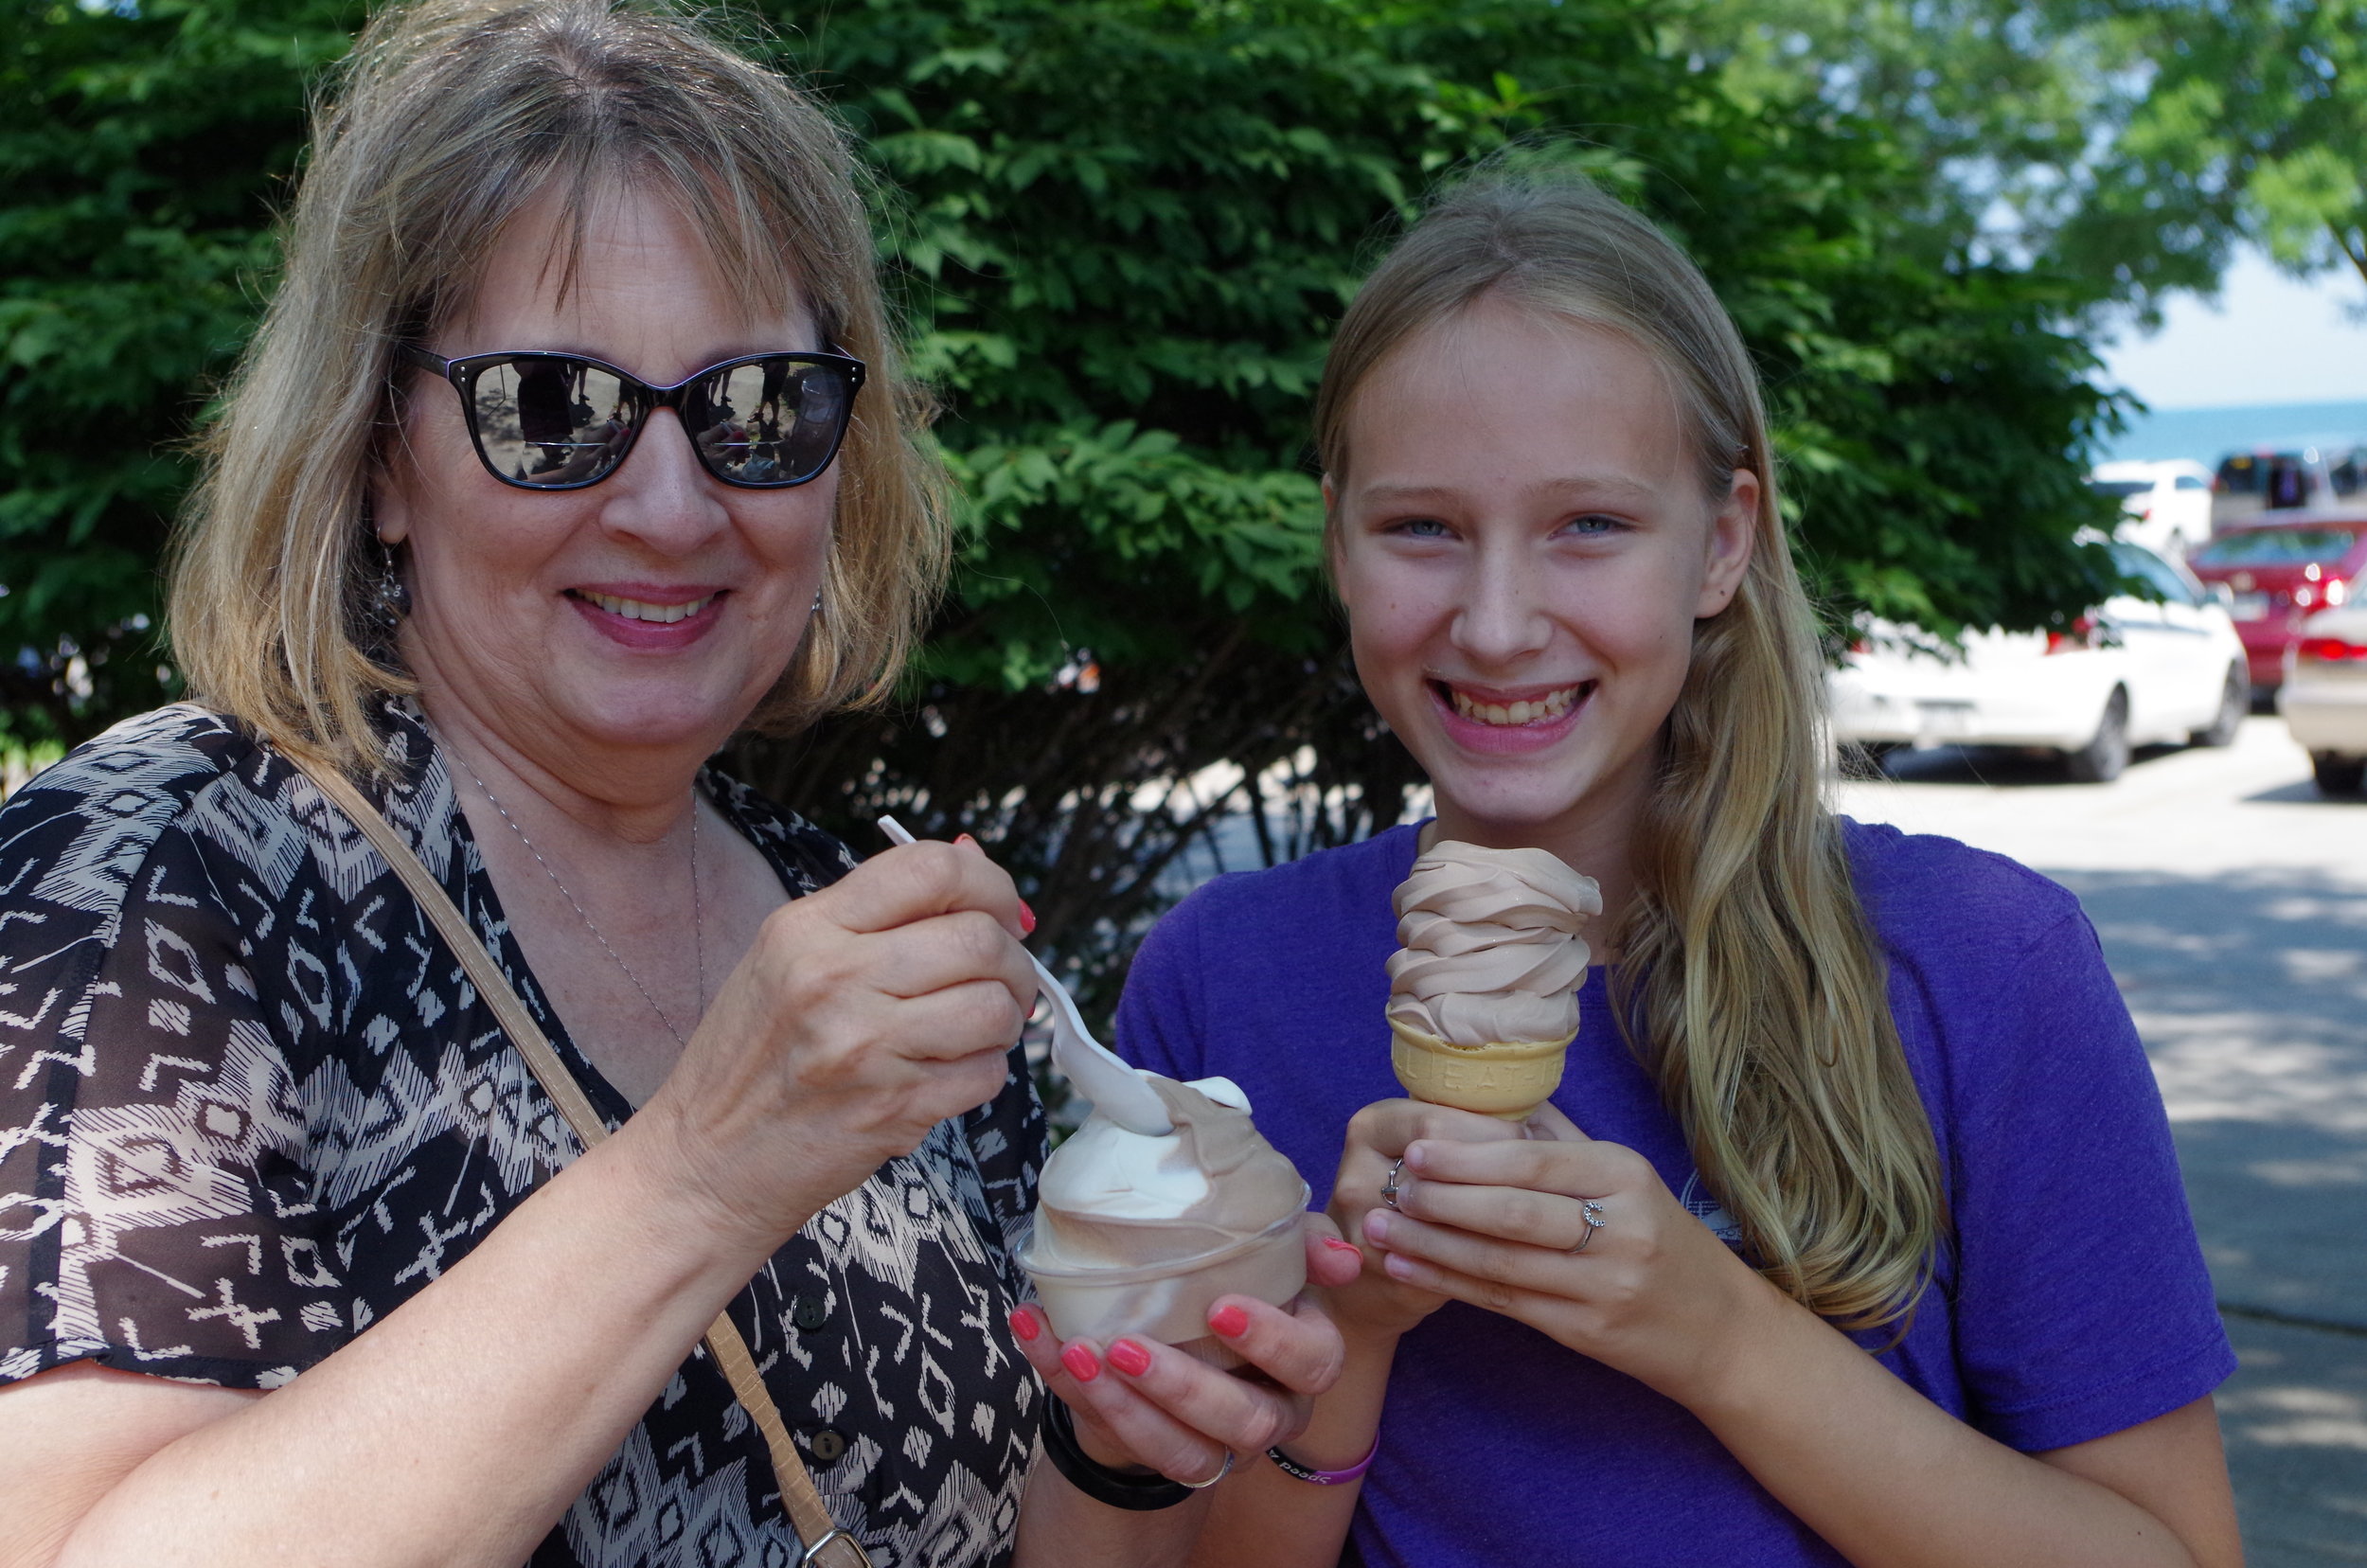  Jill enjoying a custard treat with her grand daughter at the conclusion of their Milwaukee Food & City Tour excursion. 